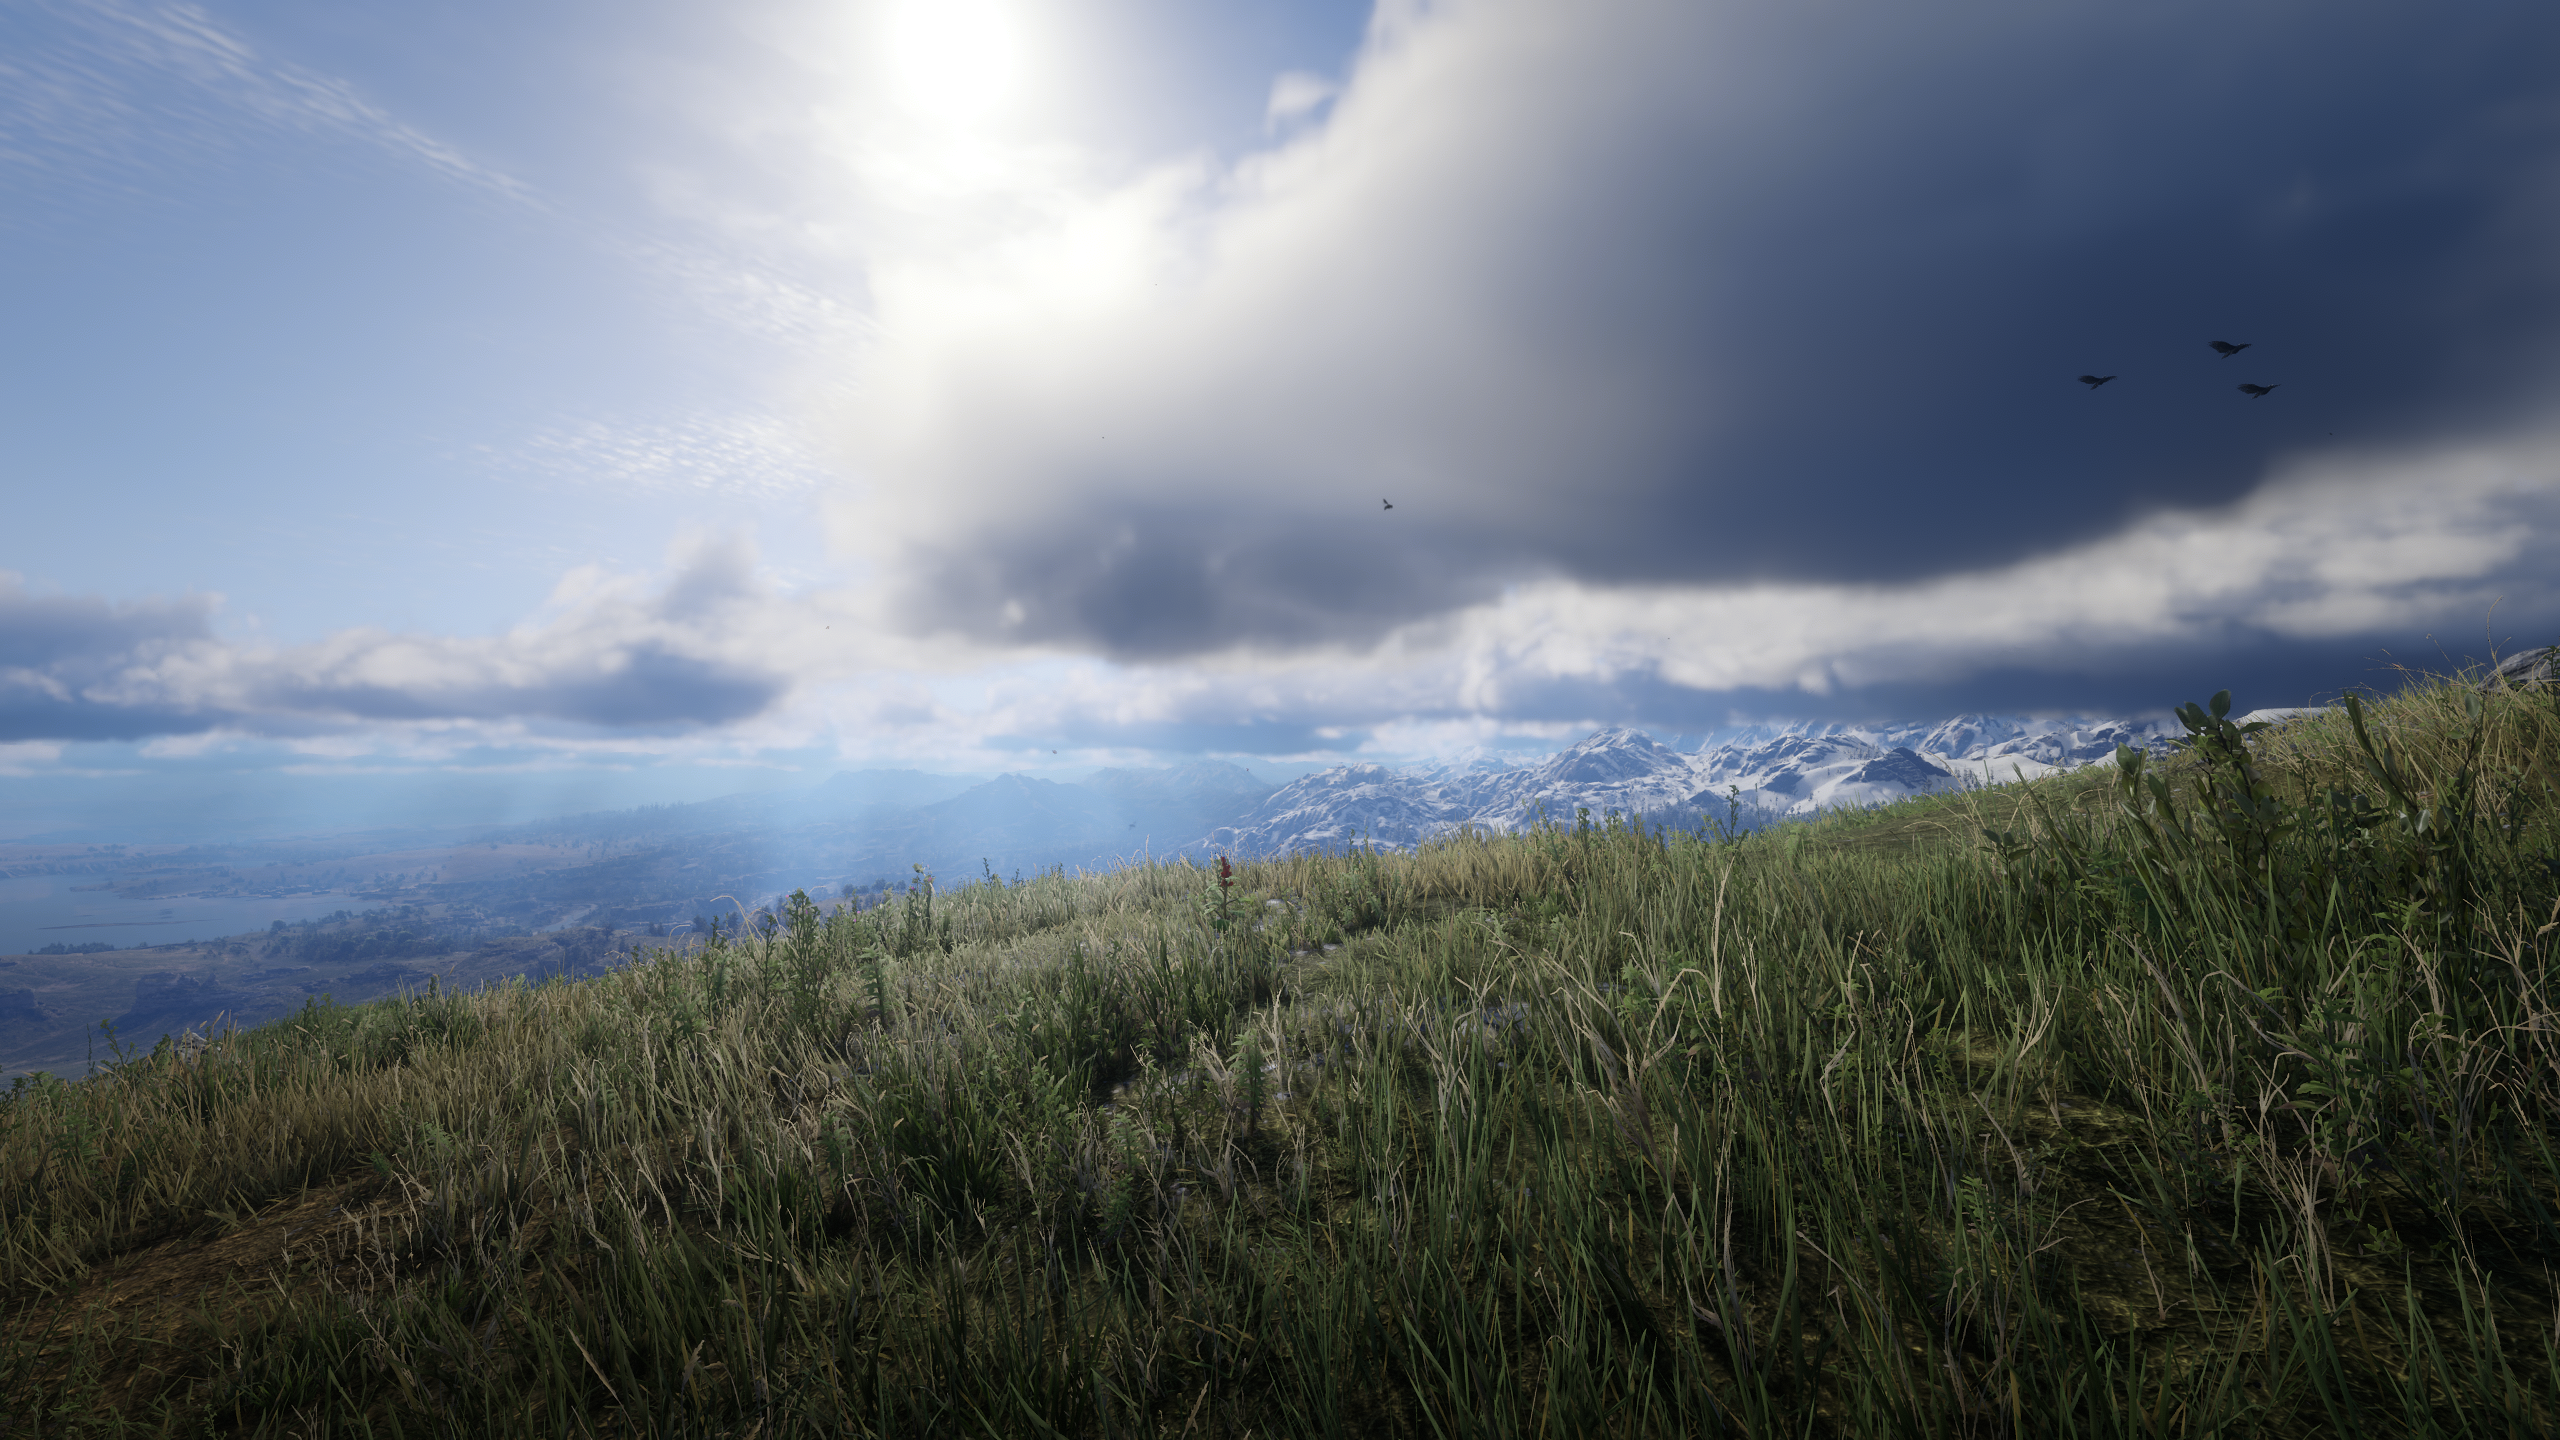 General 2560x1440 Red Dead Redemption 2 video games video game landscape grass mountains